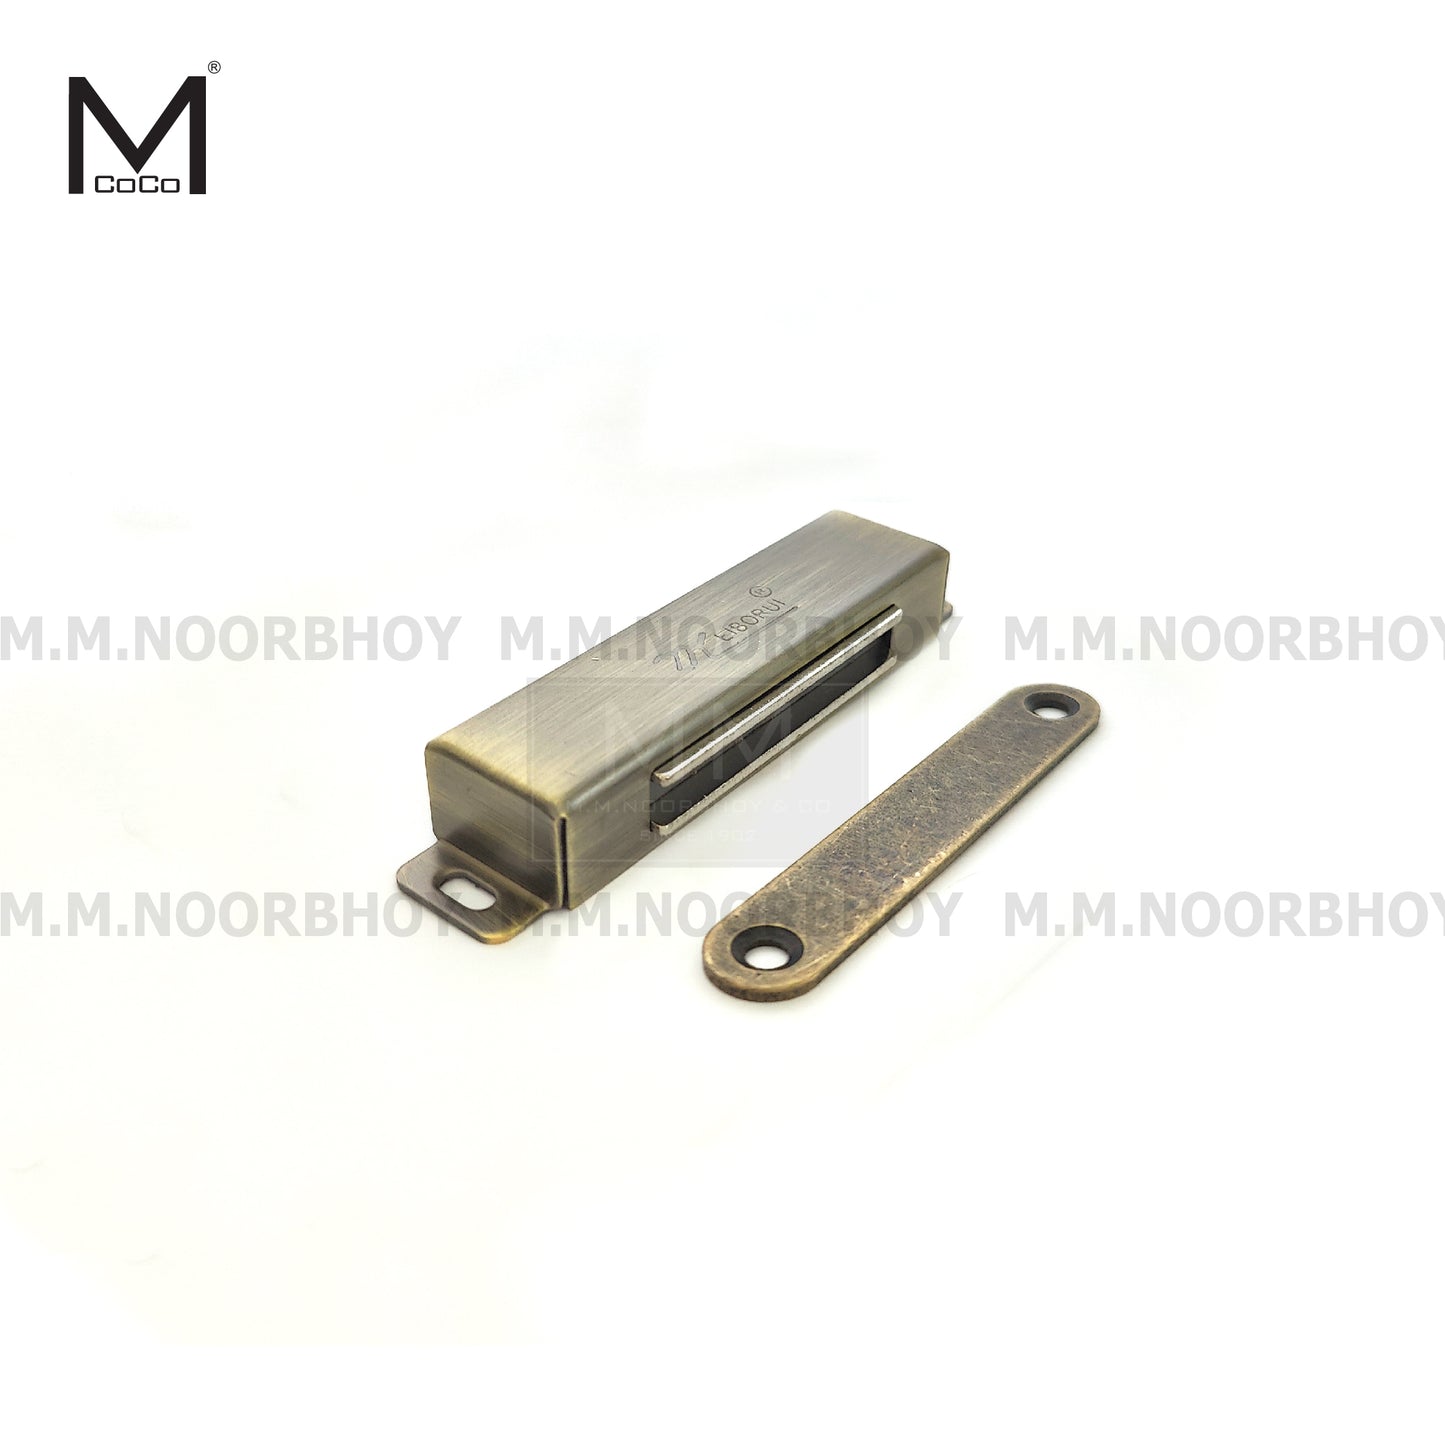 Mcoco SS and MAB Cabinet Magnet – YI-8